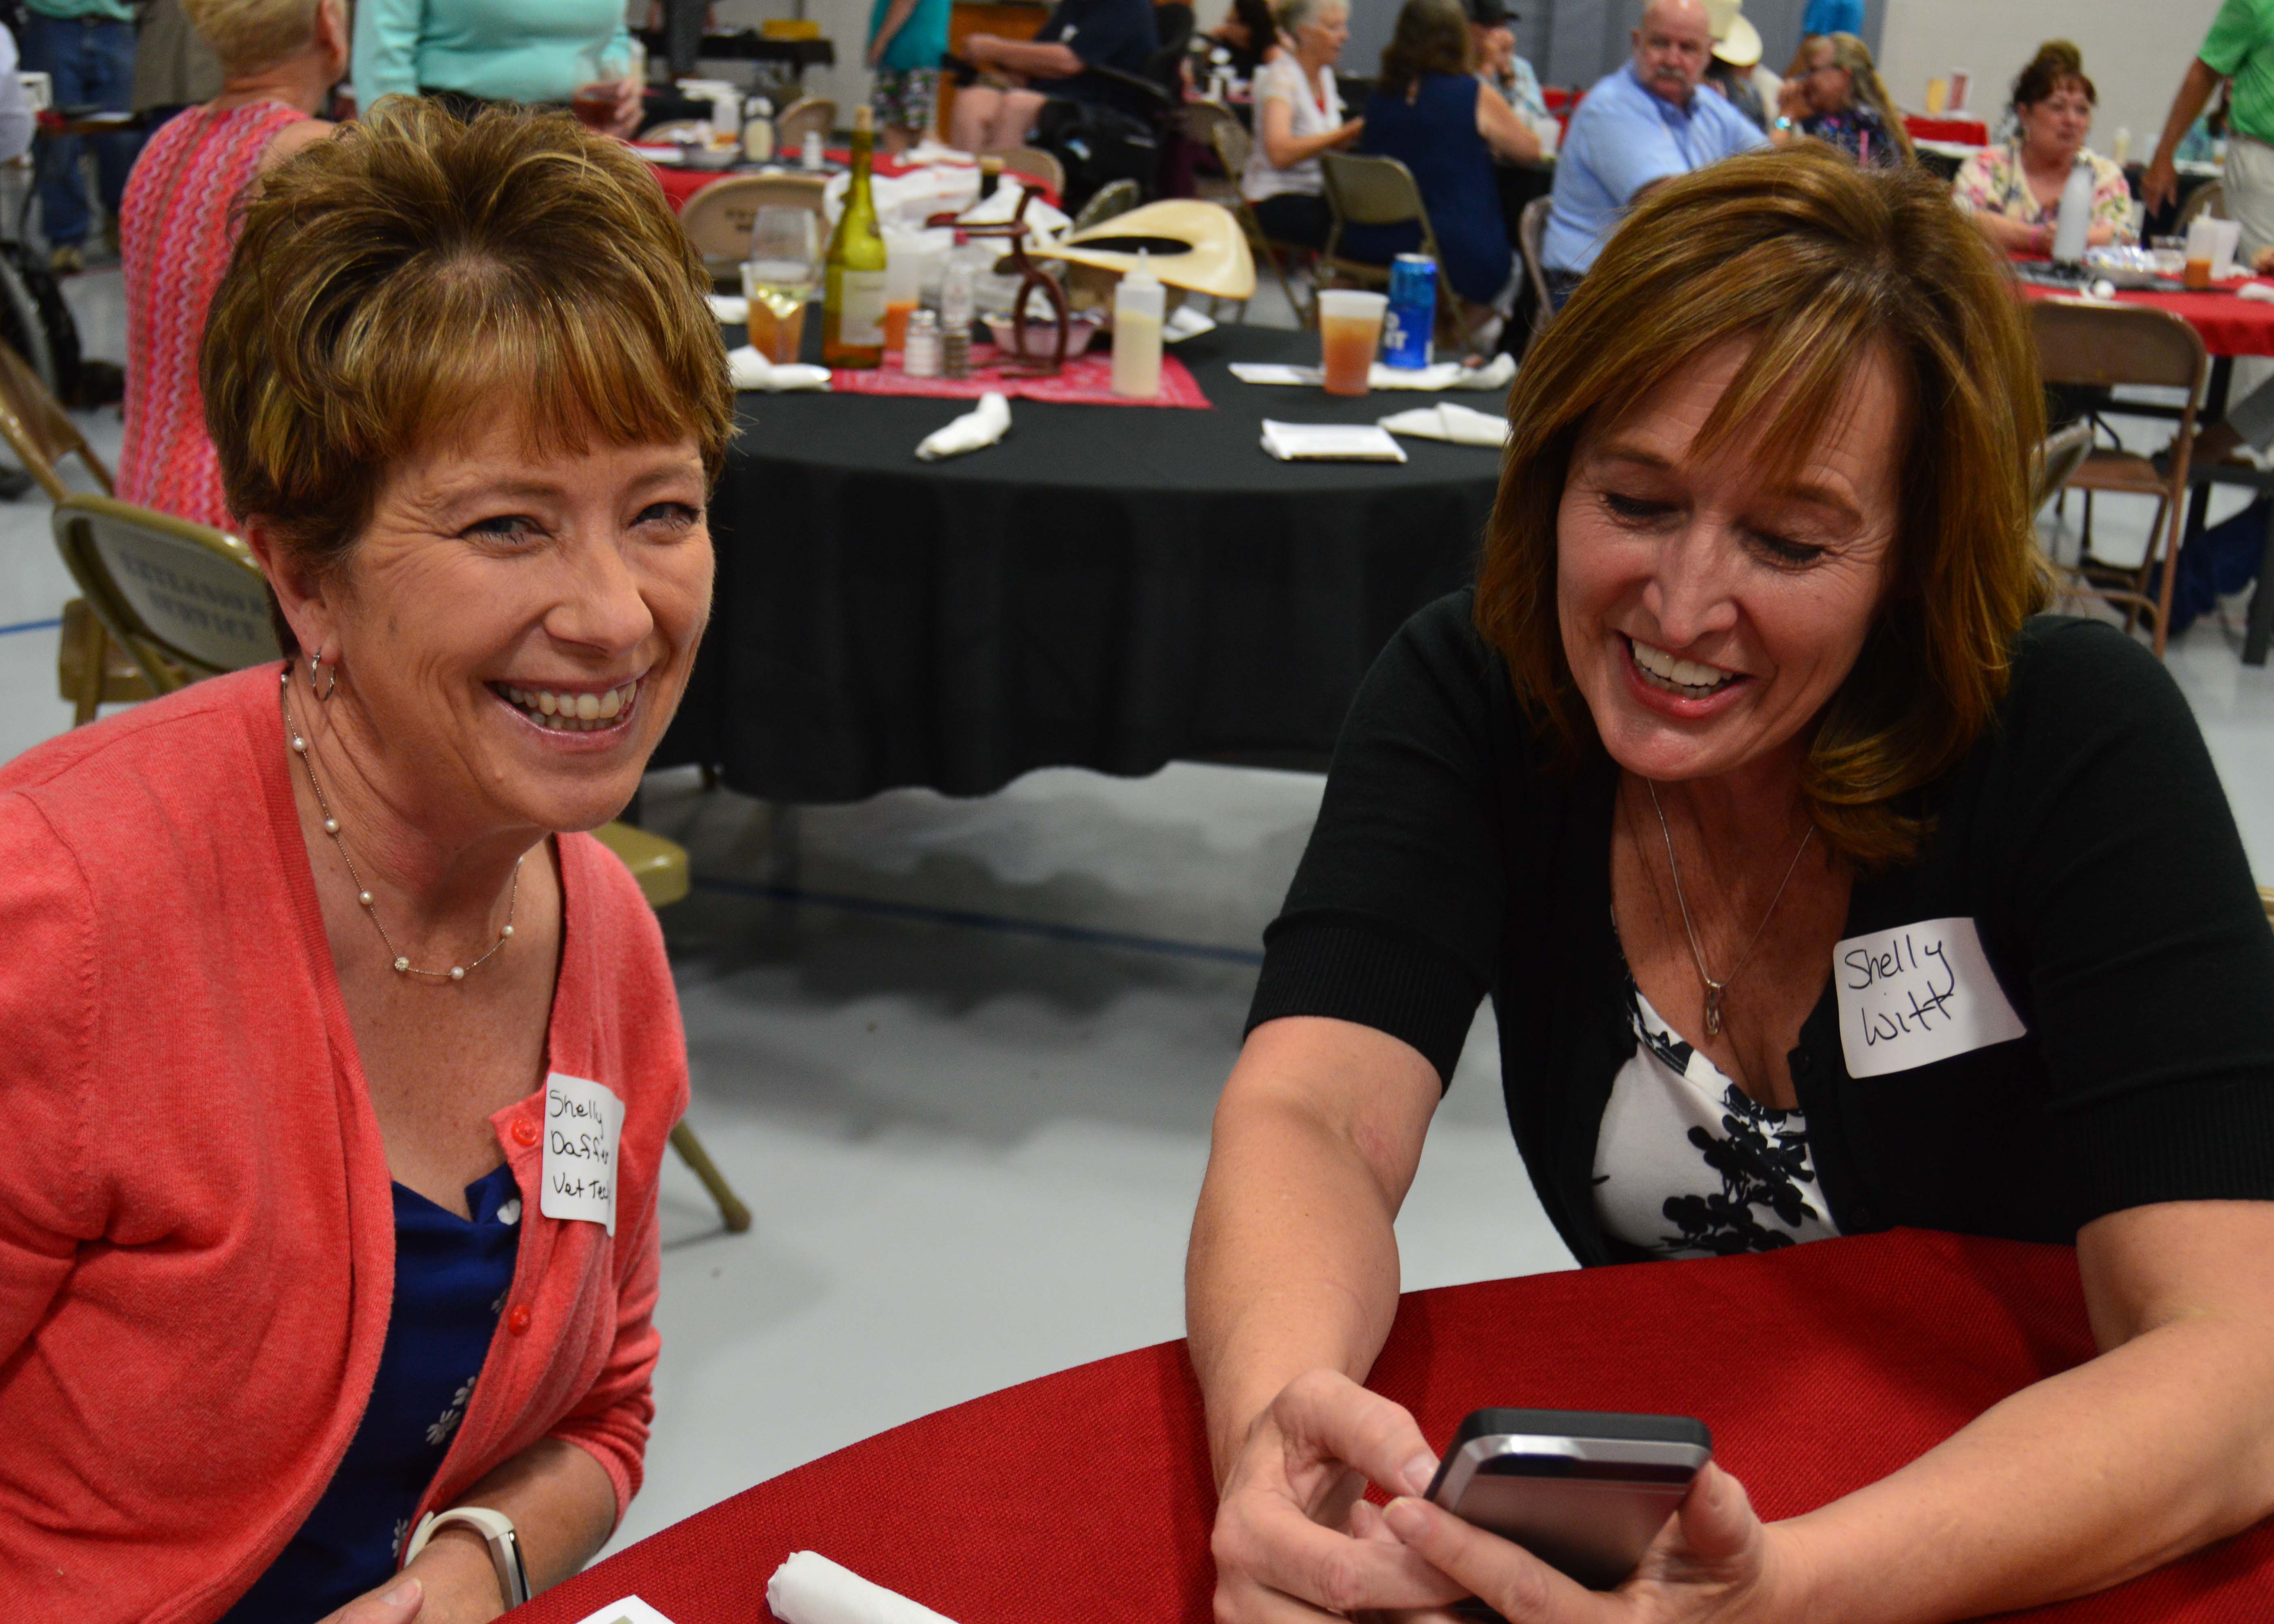 Shelly Daffer, left, and Shelly Witt share memories at the 2018 Aggie Alumni banquet. The 2019 meeting is June 22 in Broken Bow. (Crawford/NCTA News)